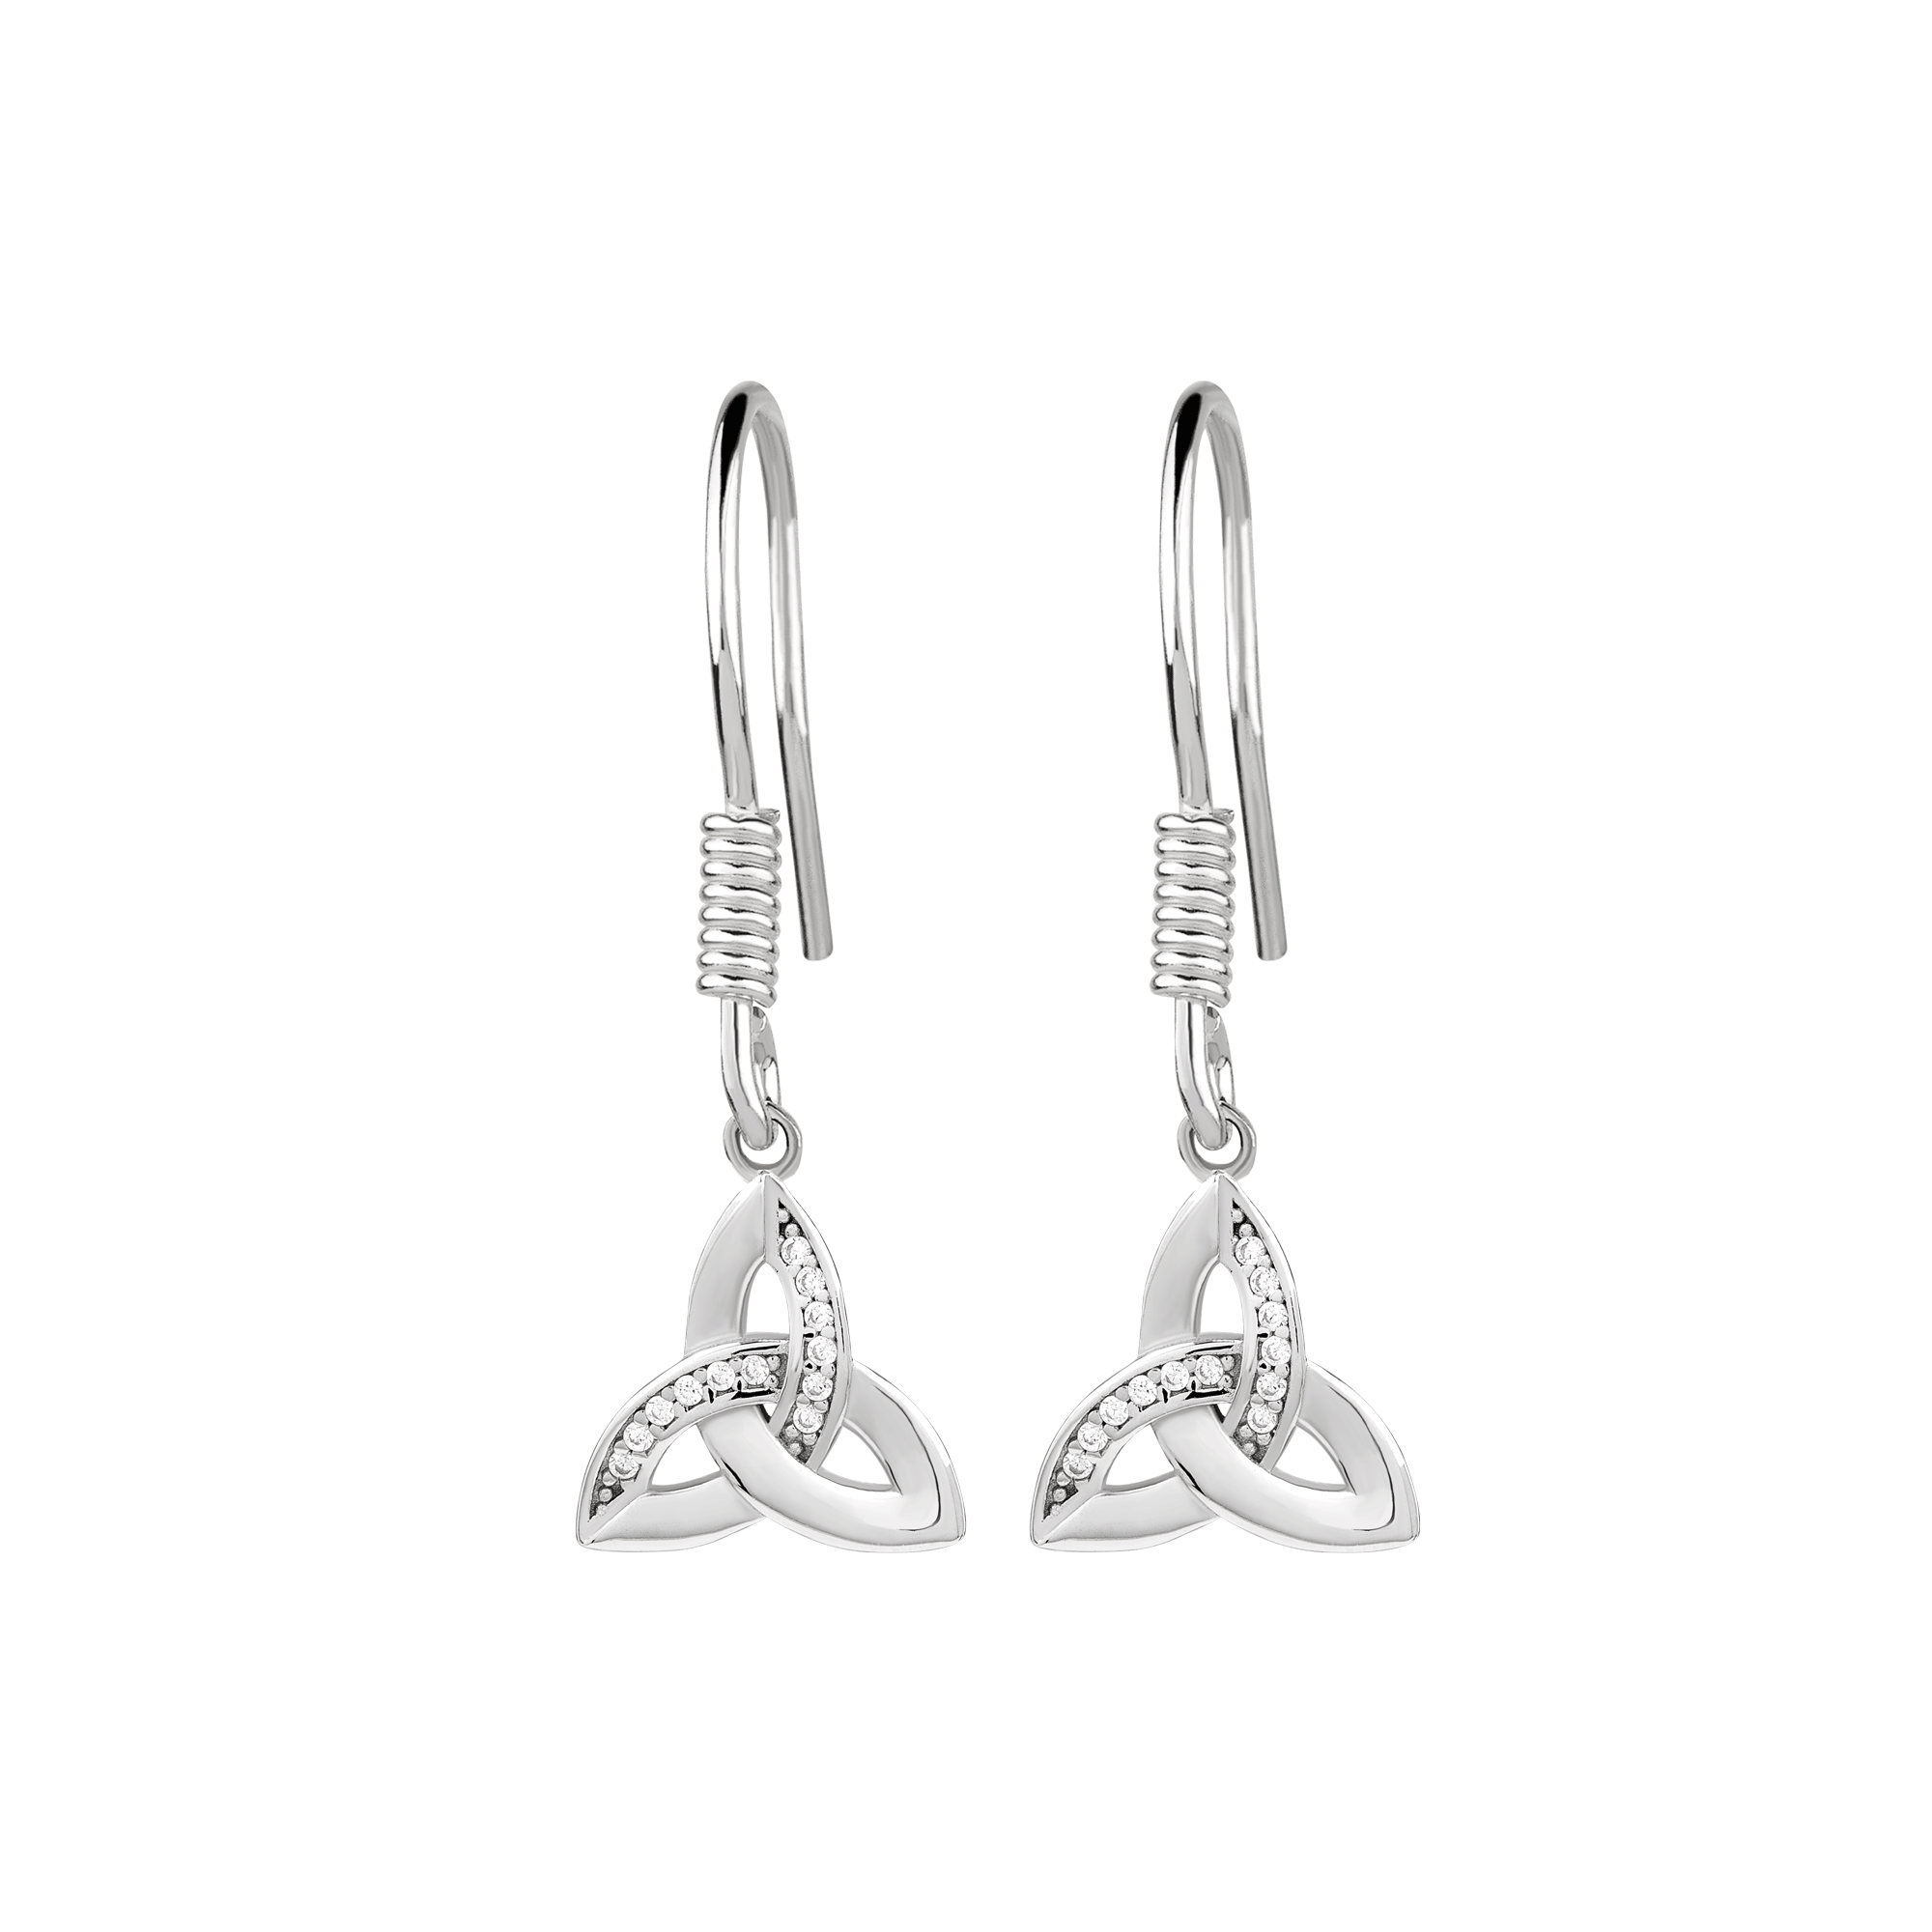 Trinity Symbol Earrings with CZ Accents